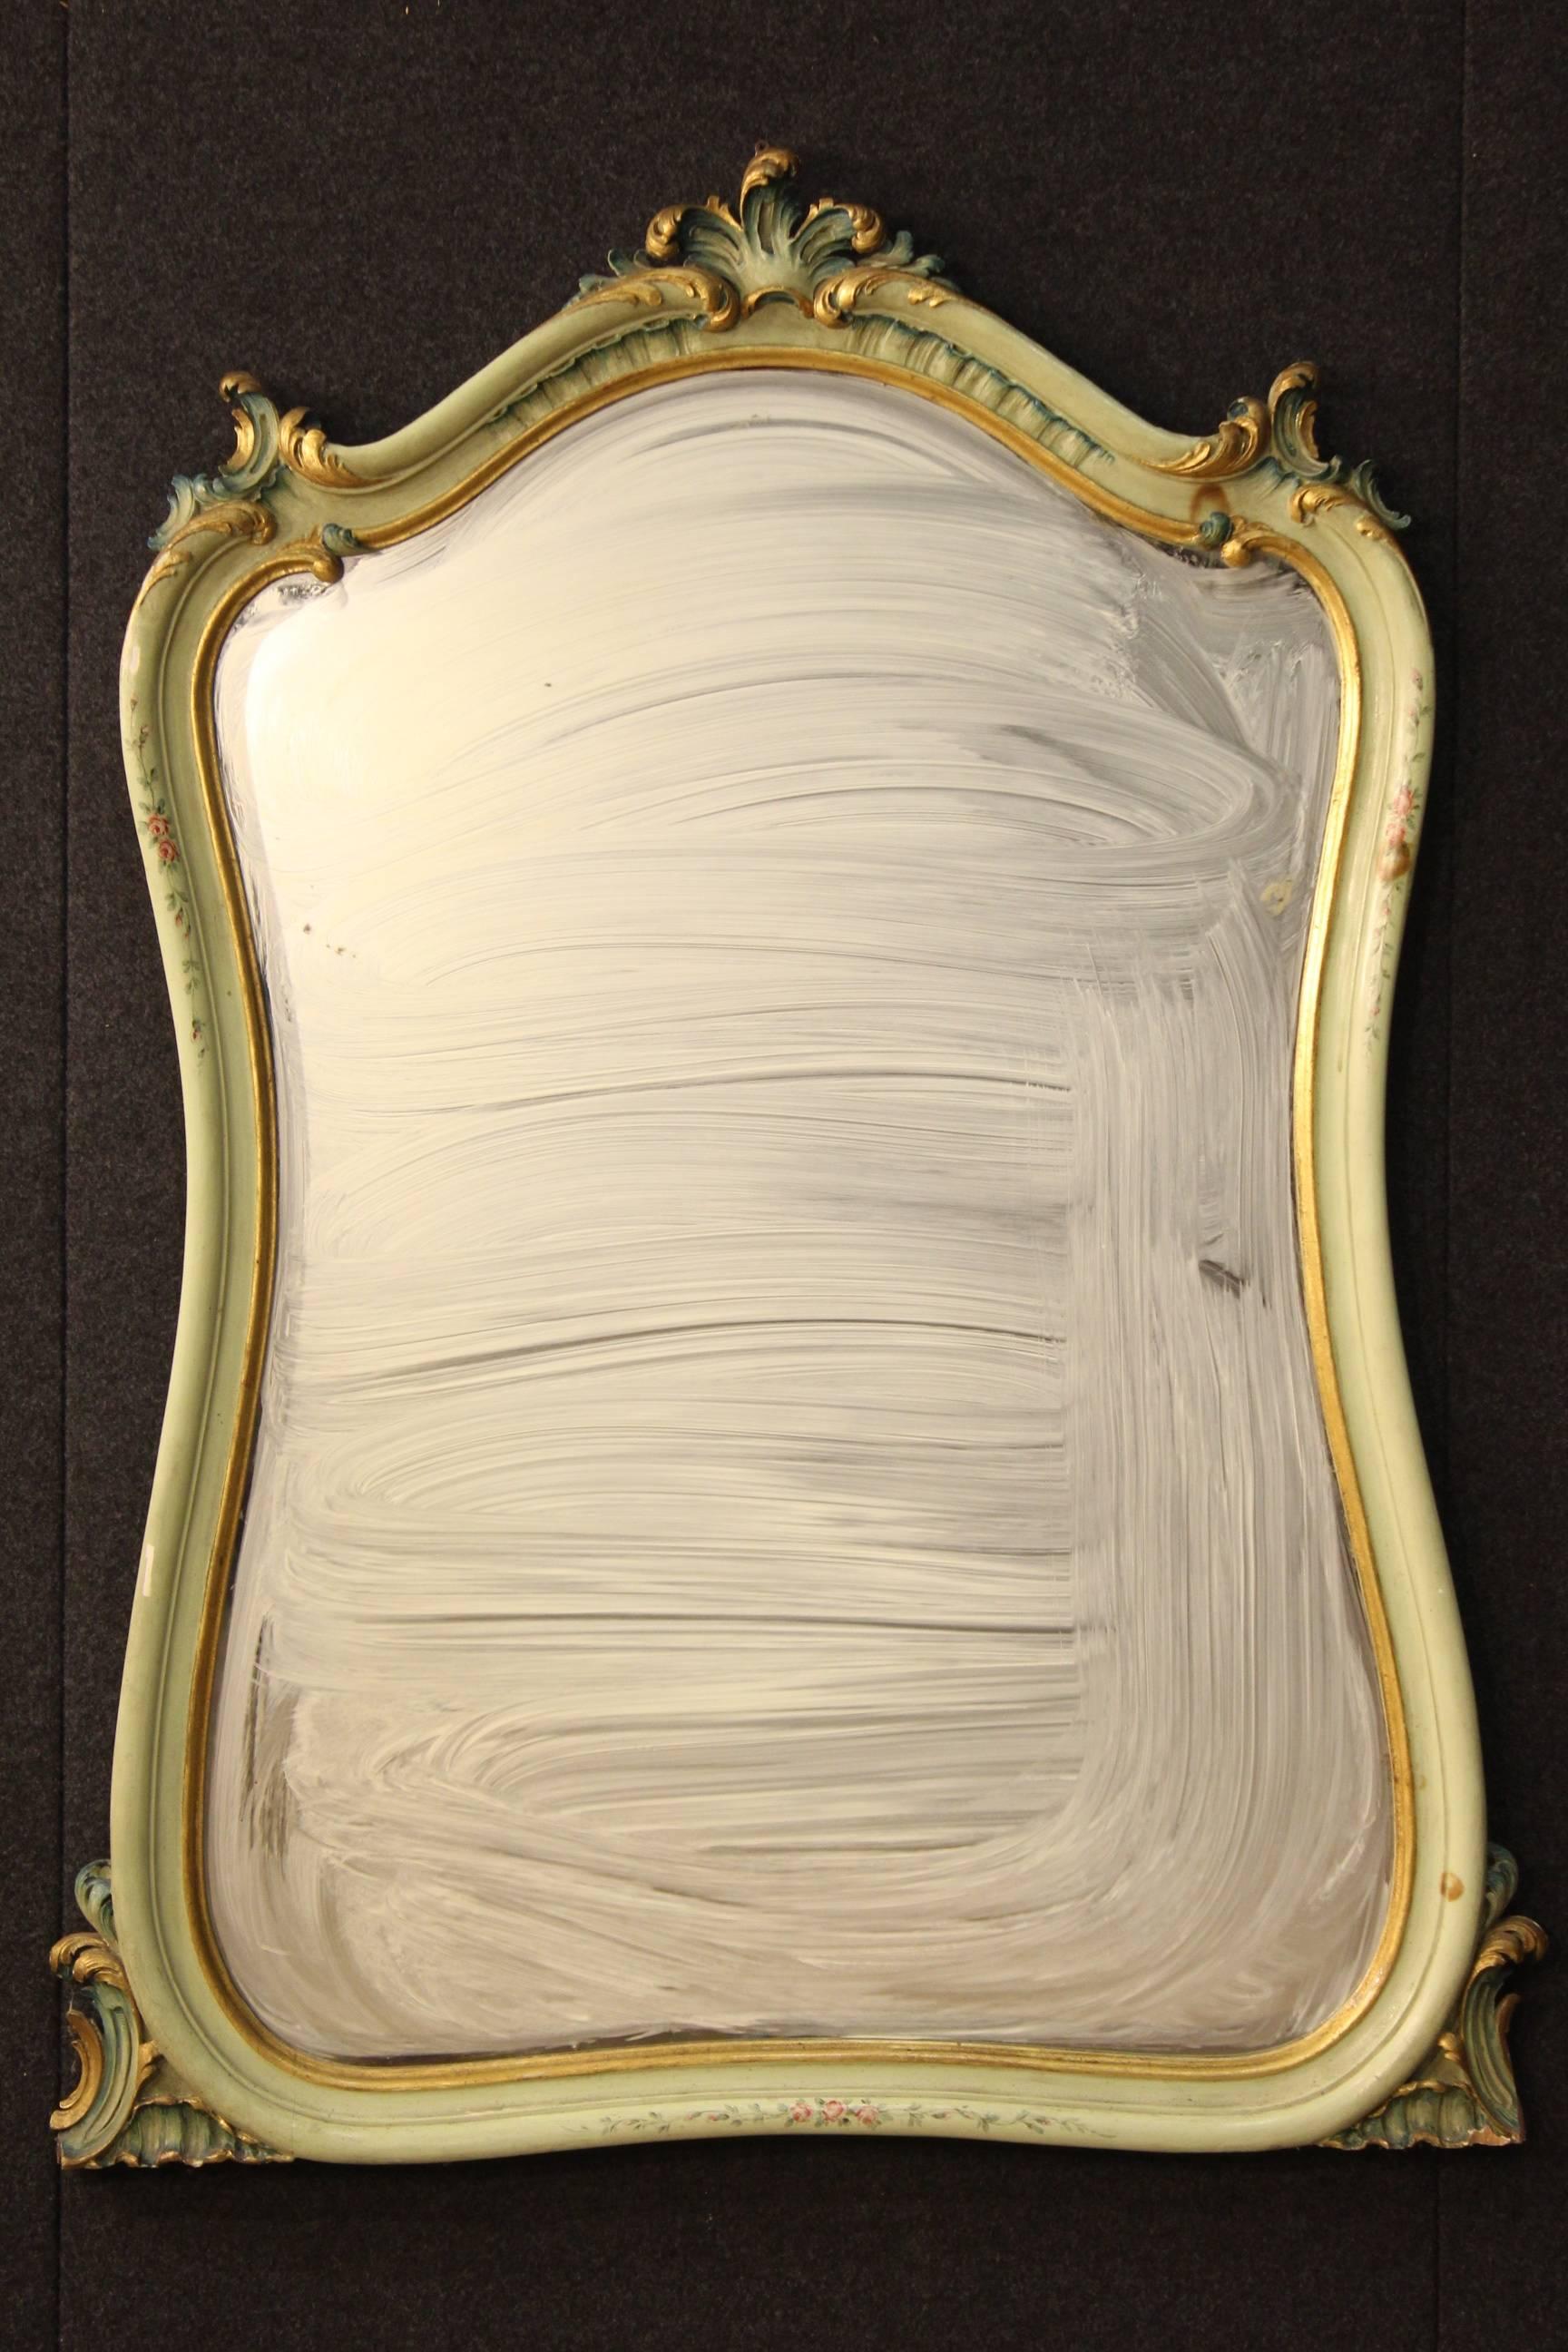 Big Venetian mirror in finely carved, gilded and hand-painted with floral motifs wood. Furniture of the 20th century of decoration large, that can be easily inserted into different parts of the house. It has some paint drops and deficiencies in the